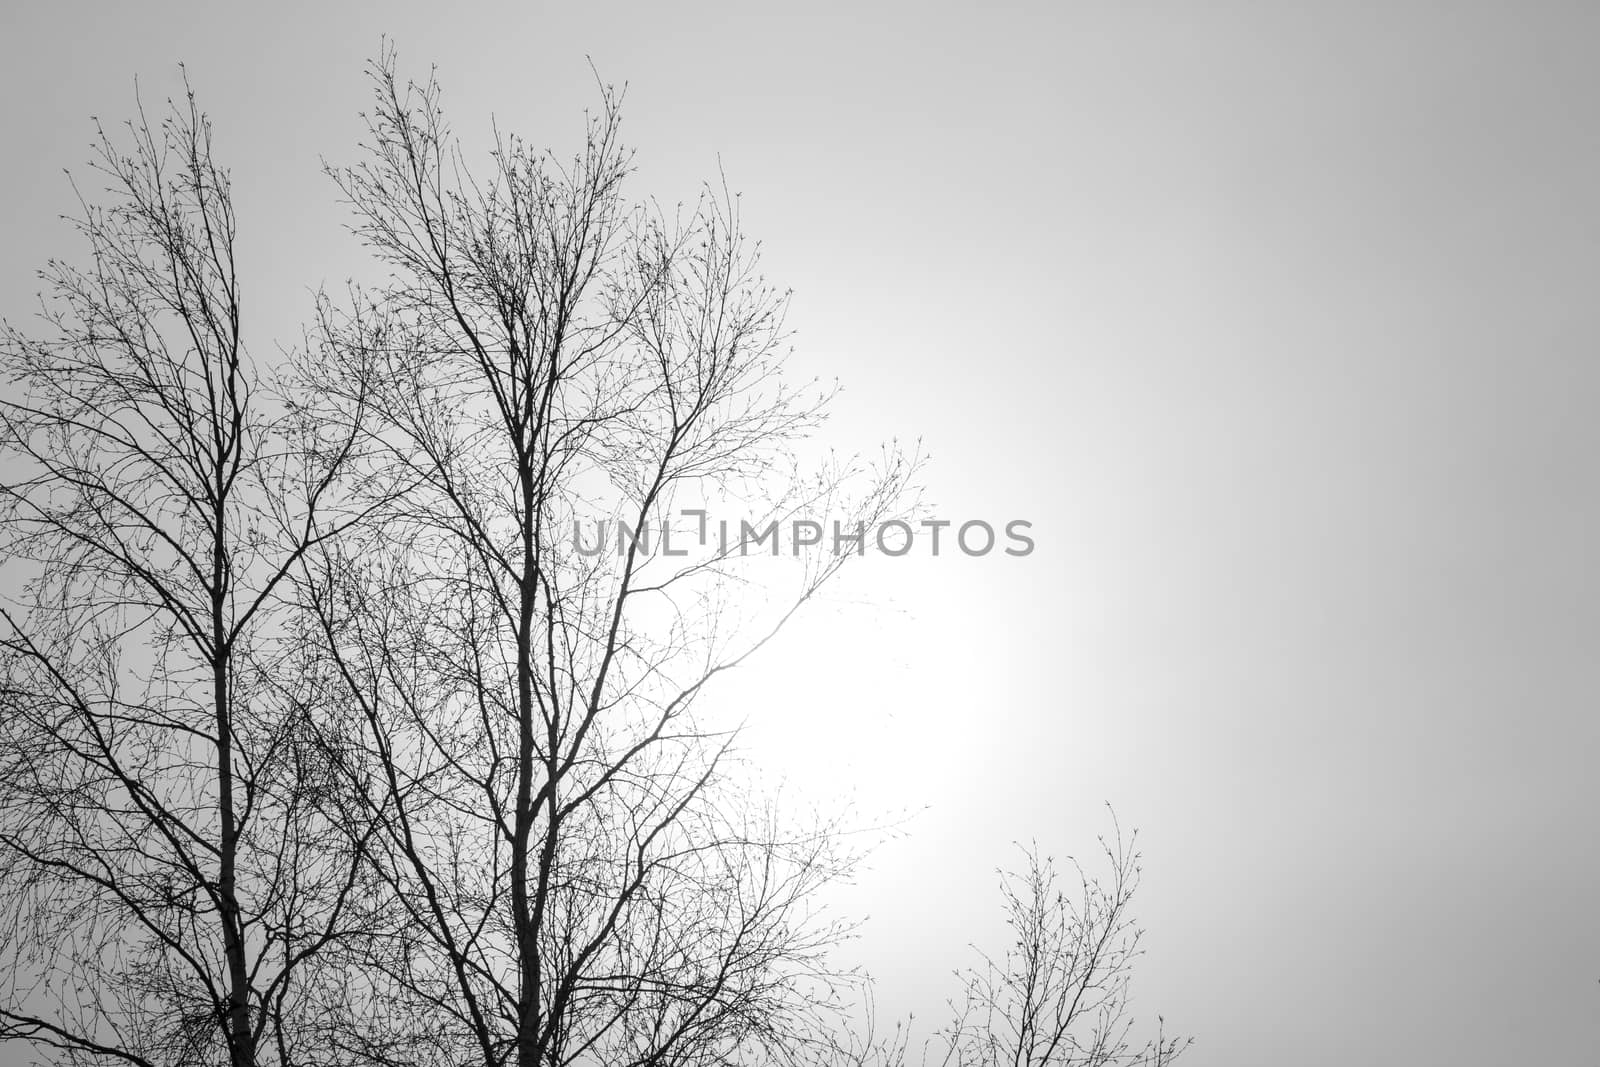 Dead Trees without Leaves by DmitryOsipov